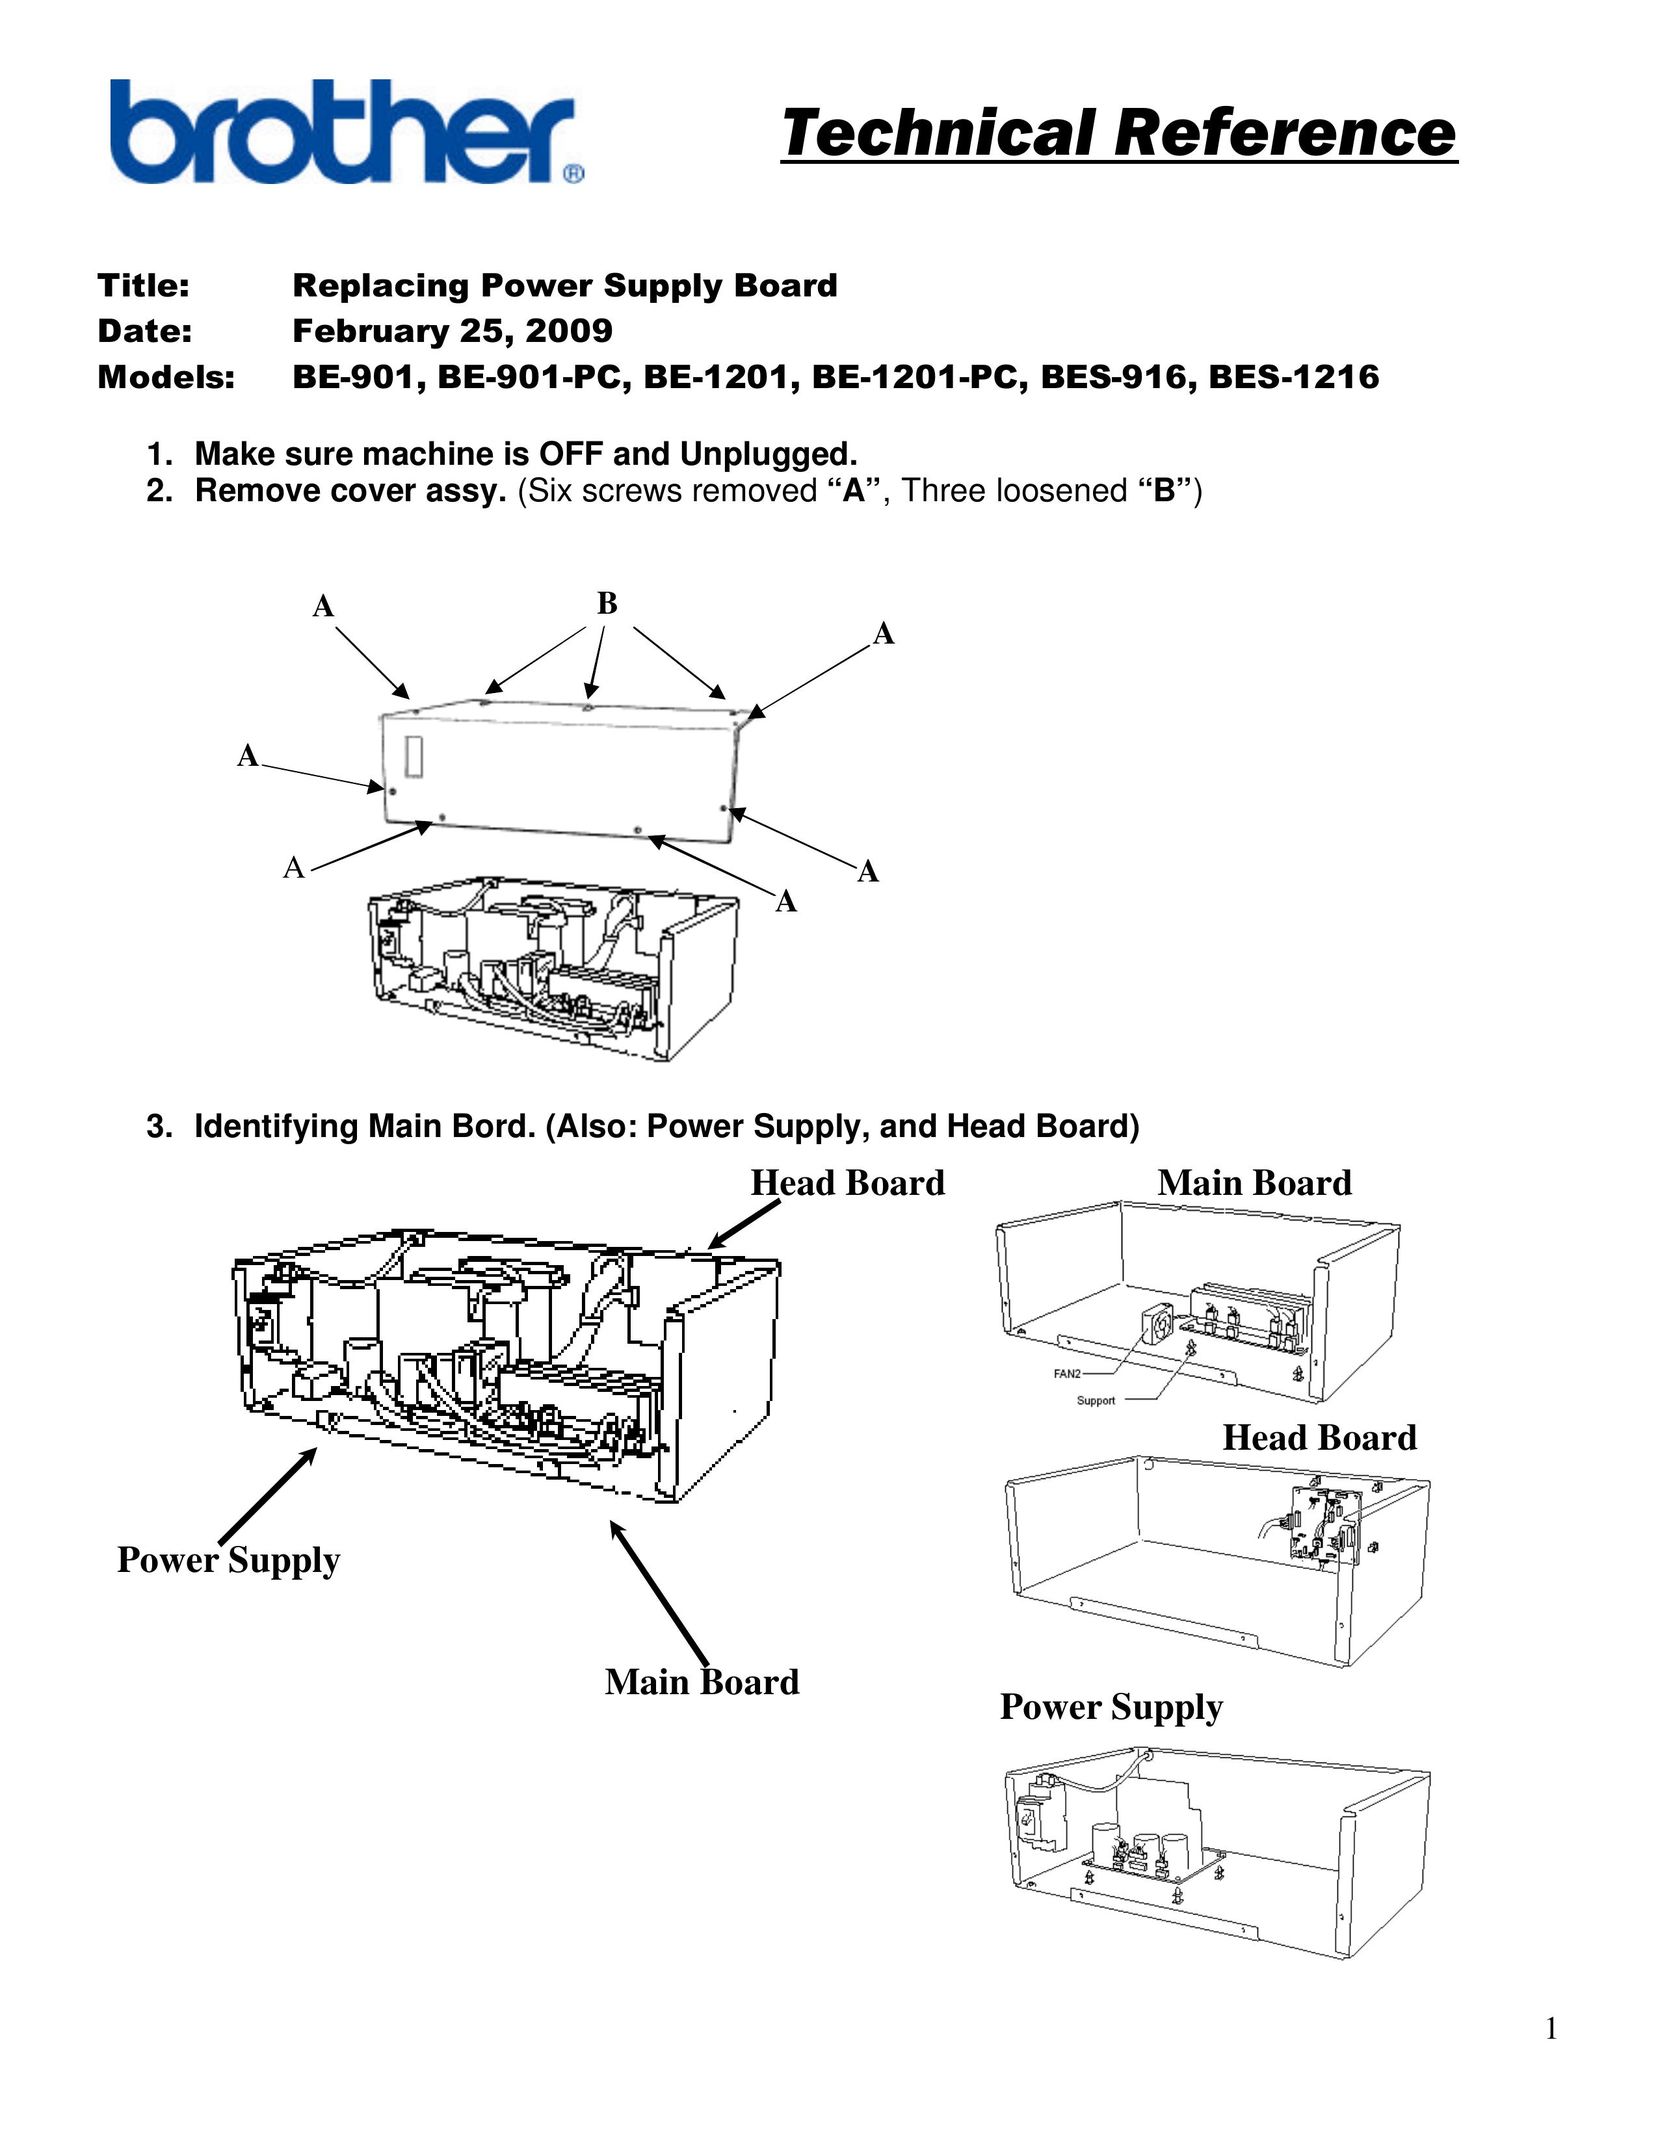 Brother BE-1201-PC Power Supply User Manual